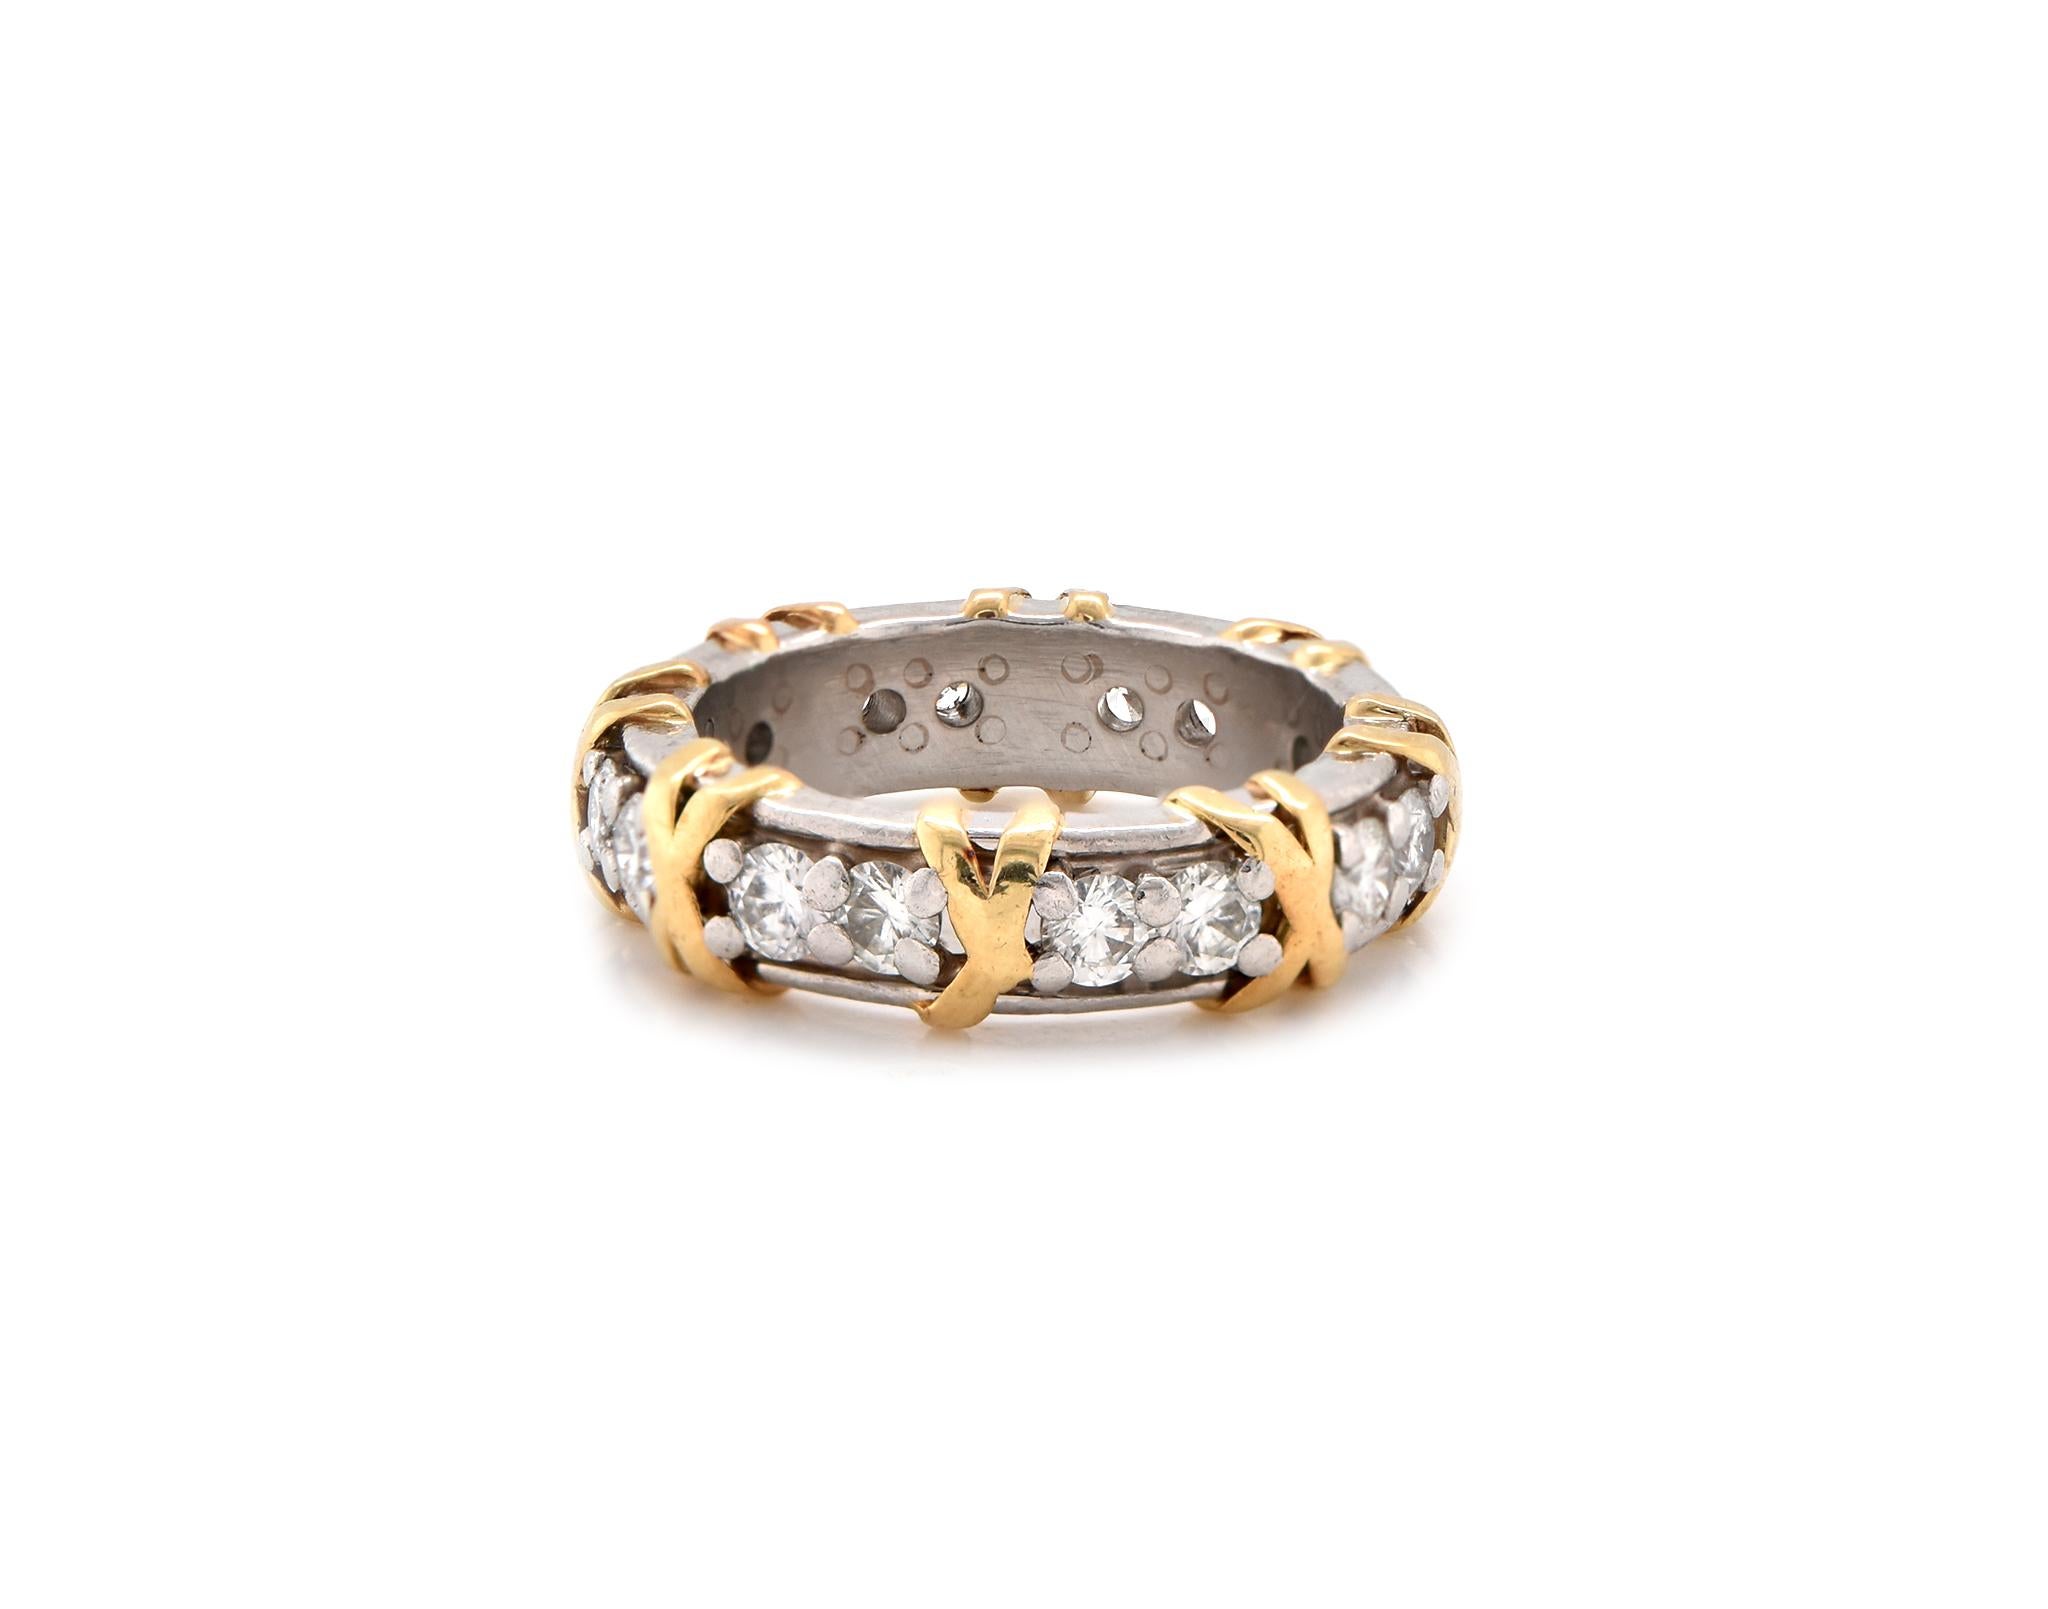 Designer: Custom
Material: Platinum / 18K yellow gold
Diamonds: 16 round brilliant cut = 1.28cttw
Color: H
Clarity: SI1
Size: 5.25
Dimensions: ring measures 5.84mm in width
Weight: 10.81grams
